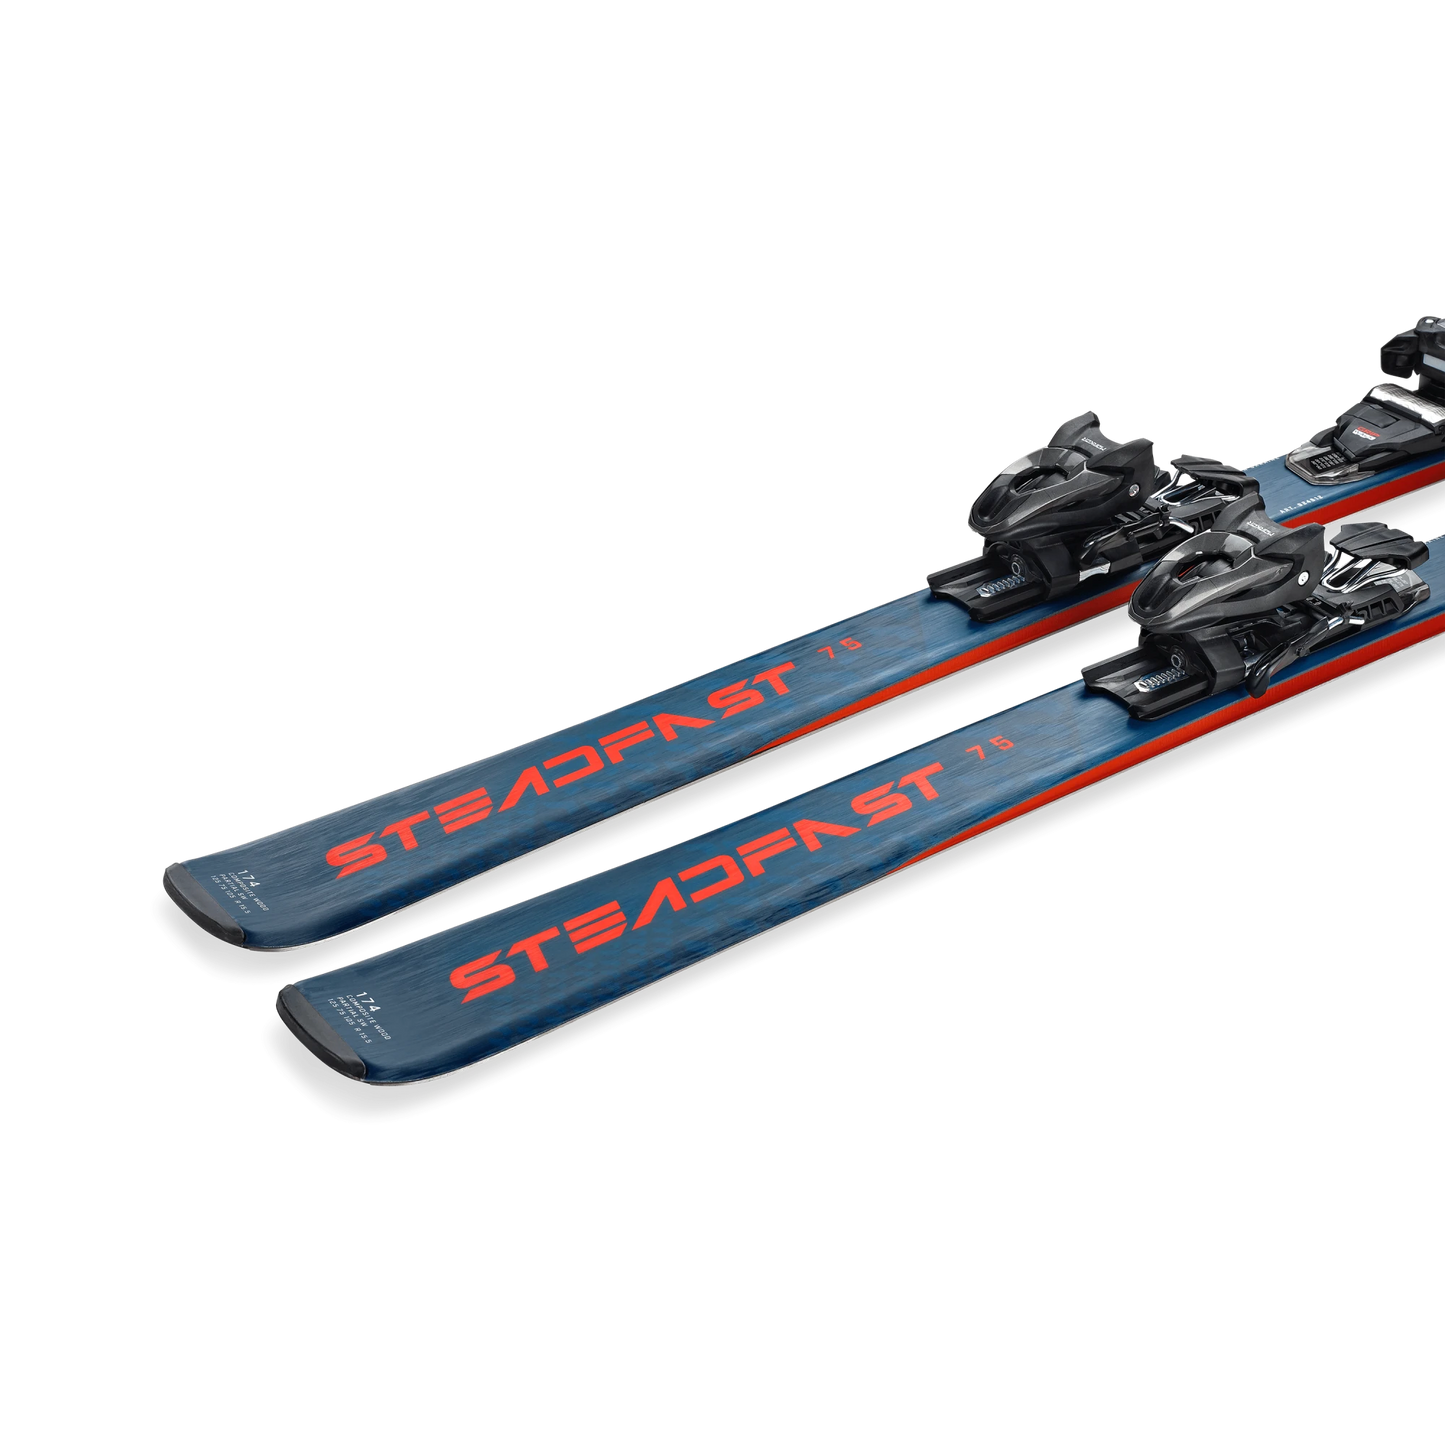 2024 Nordica Steadfast 75 CA FDT Alpine Skis with TP2 COMPACT 10 FDT Bindings|2024 Ski Alpins Nordica Steadfast 75 CA FDT avec Fixations TP2 COMPACT 10 FDT